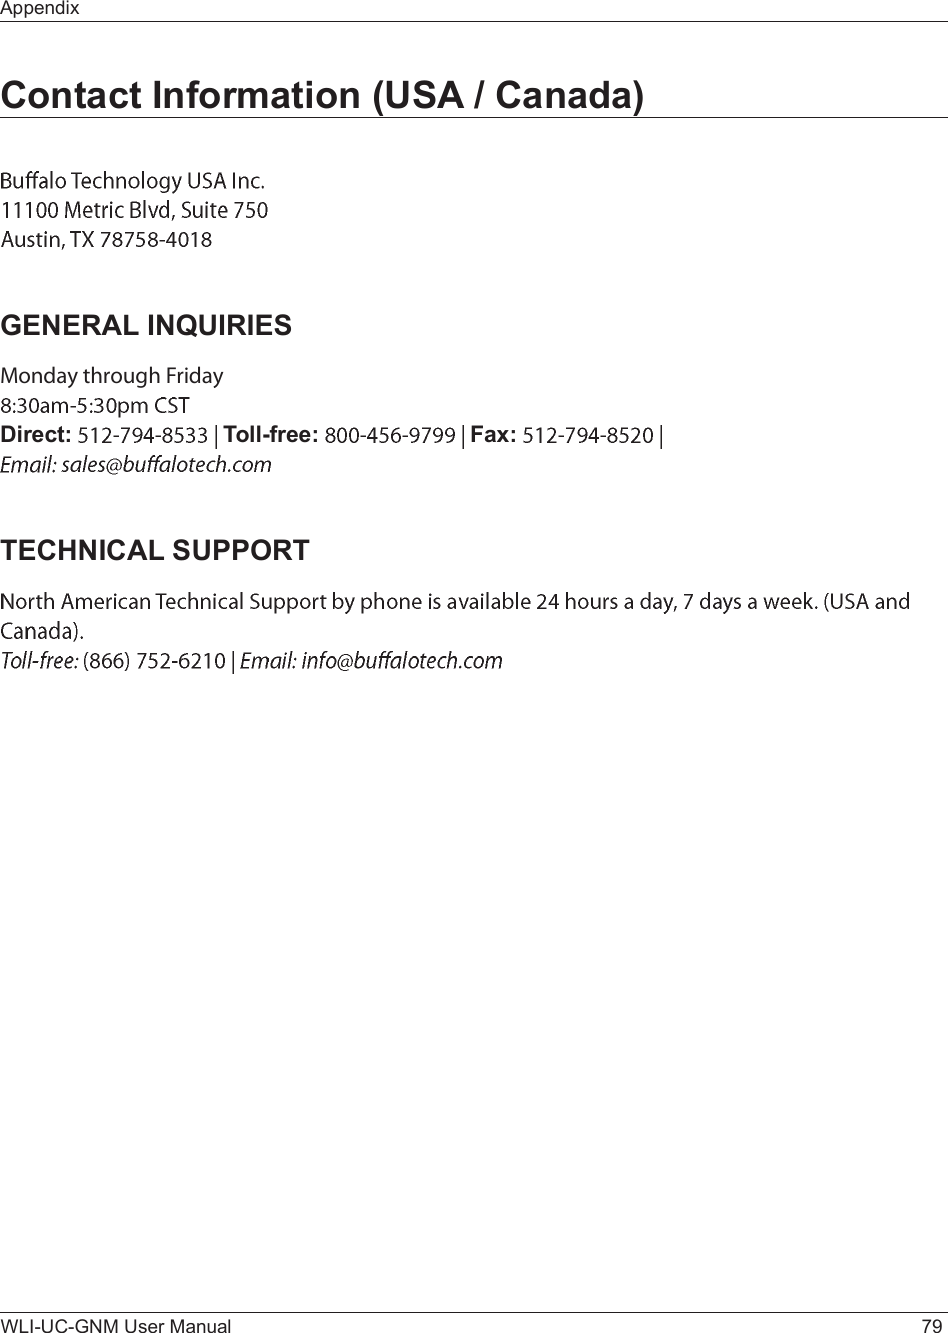 AppendixWLI-UC-GNM User Manual 79Contact Information (USA / Canada)GENERAL INQUIRIESÓ±²¼¿§ ¬¸®±«¹¸ Ú®·¼¿§Direct: Toll-free: Fax:TECHNICAL SUPPORT